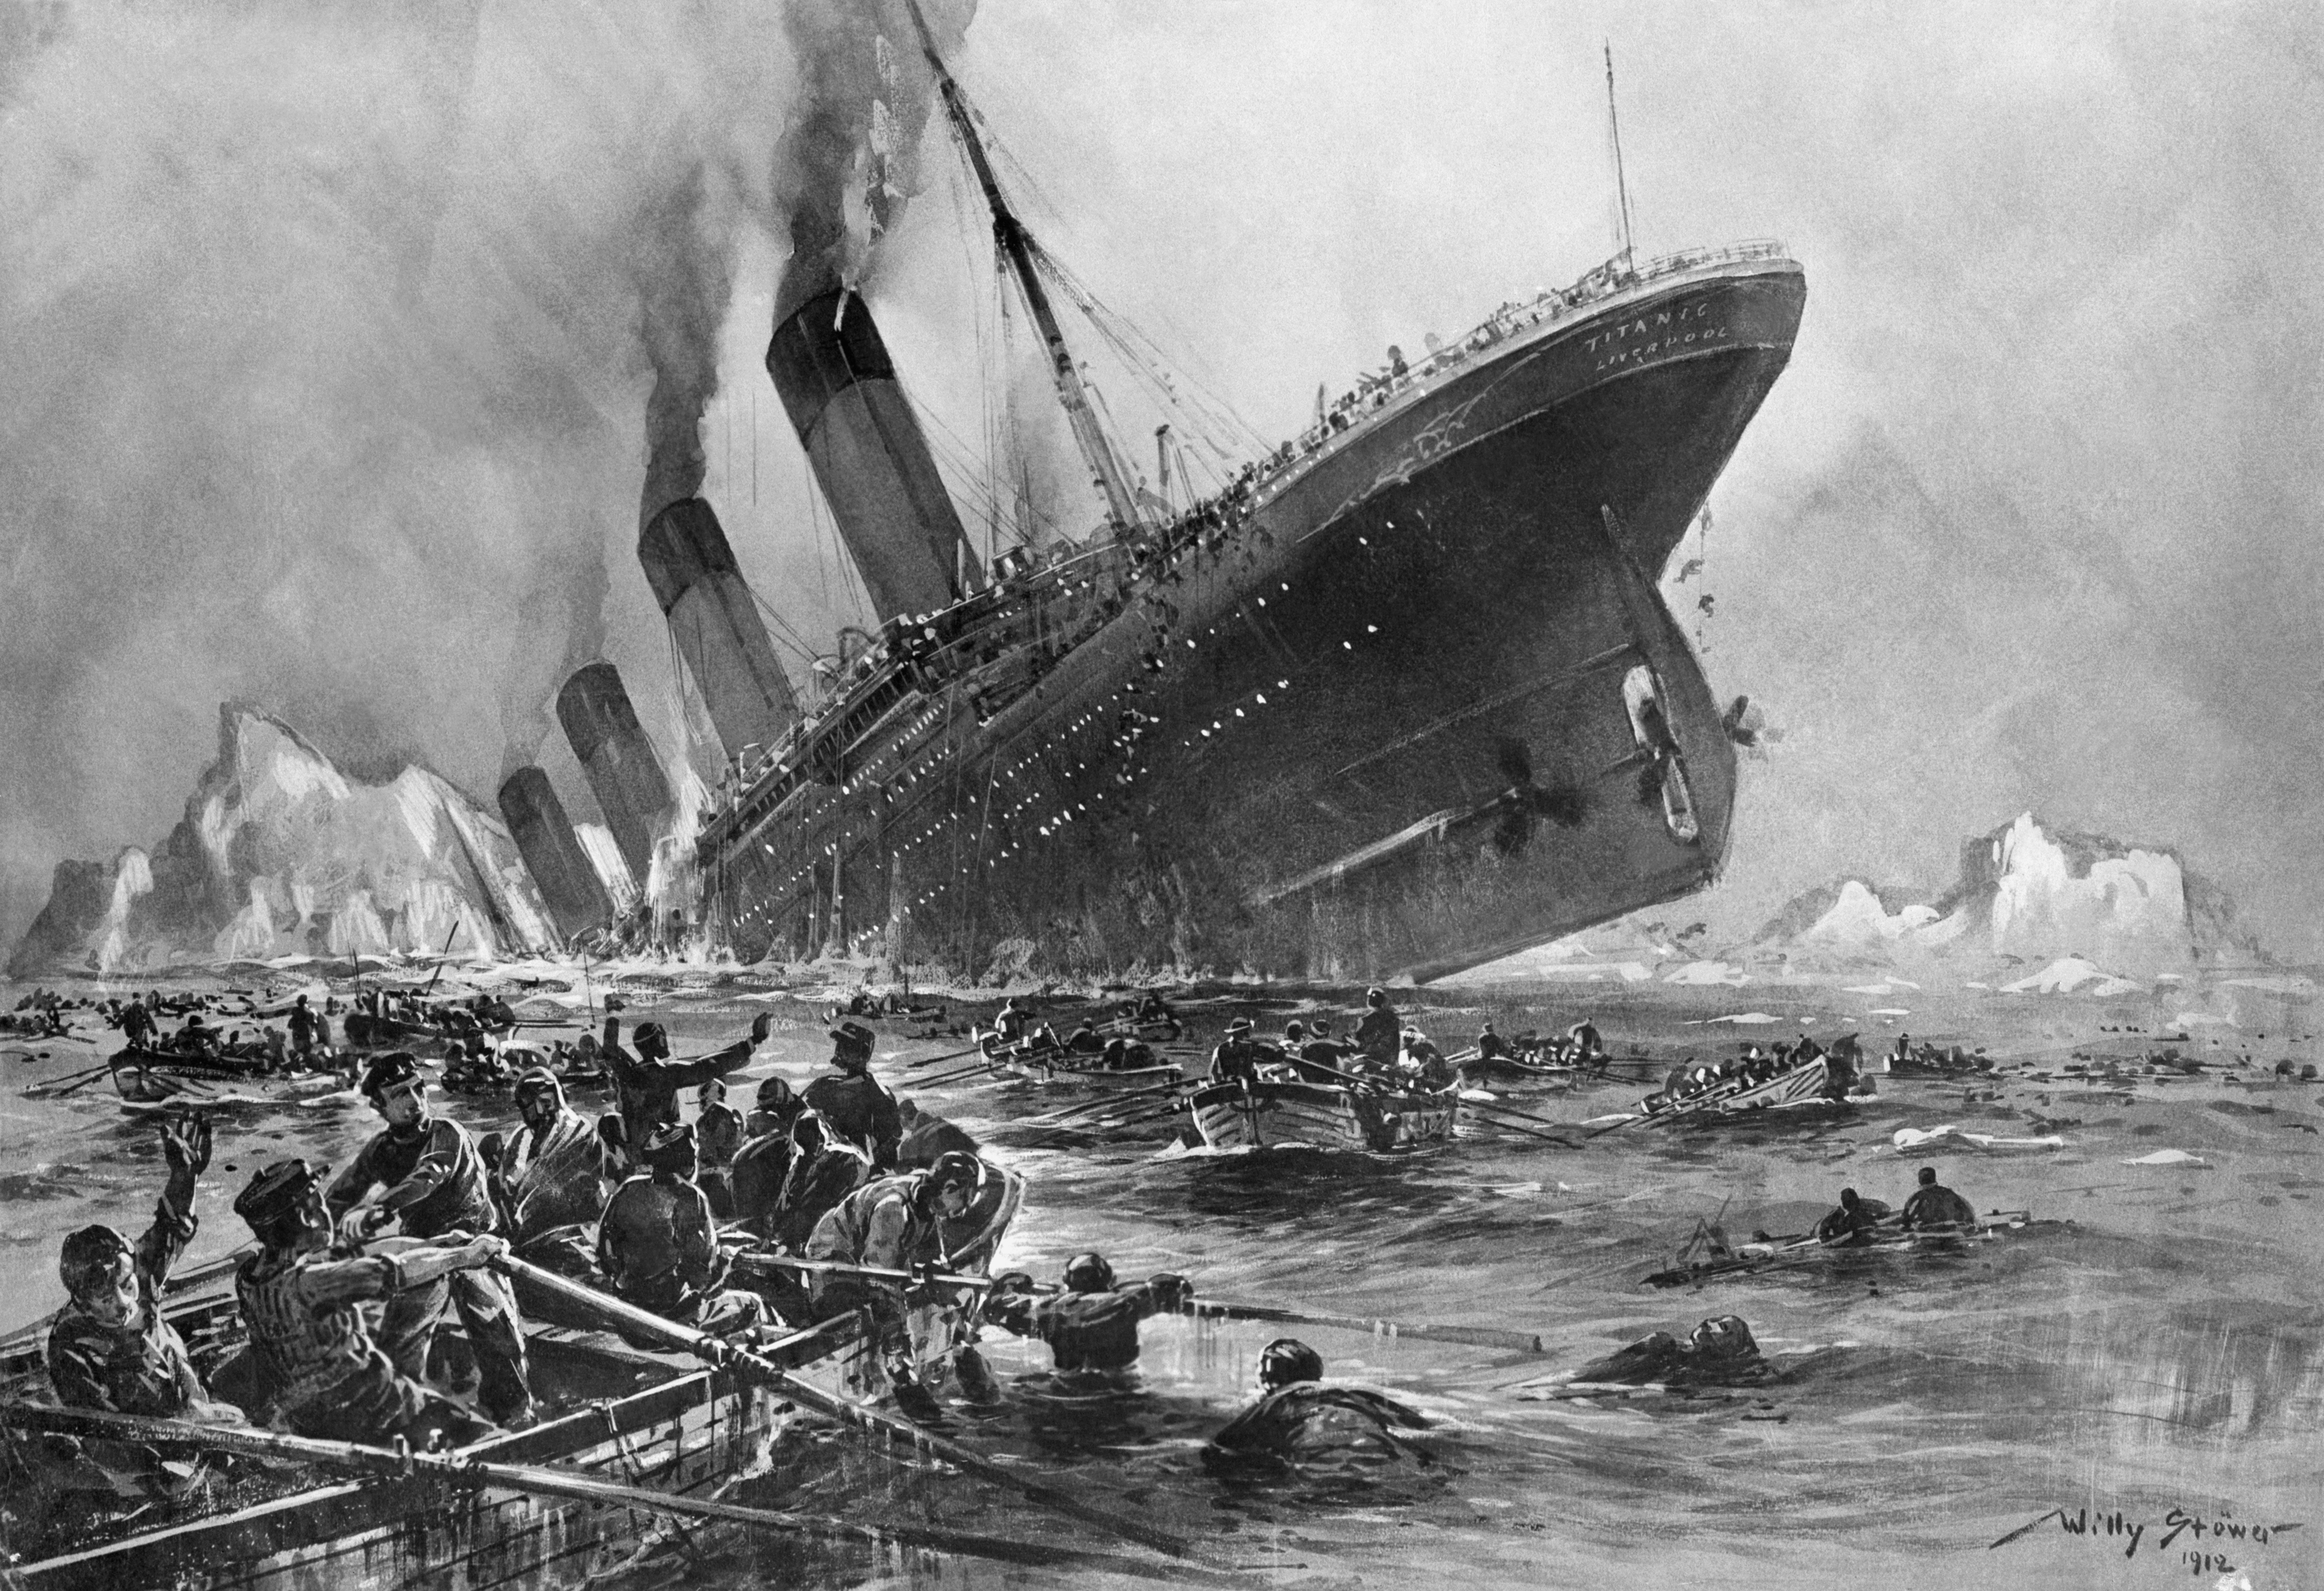 A rendering of the Titanic